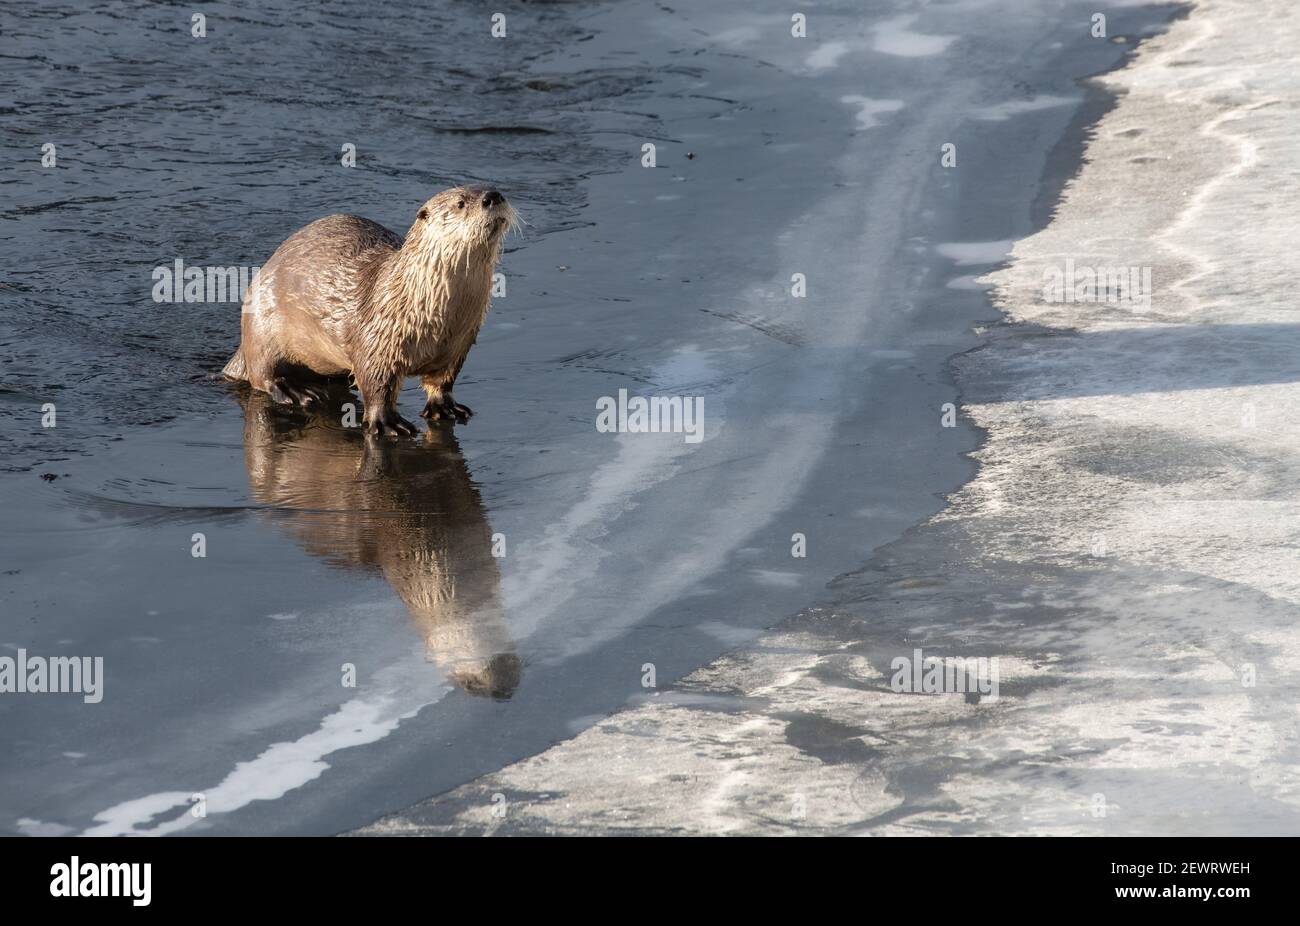 River otter (Lontra canadensis), standing on ice, with reflection, Yellowstone National Park, UNESCO World Heritage Site, Wyoming Stock Photo